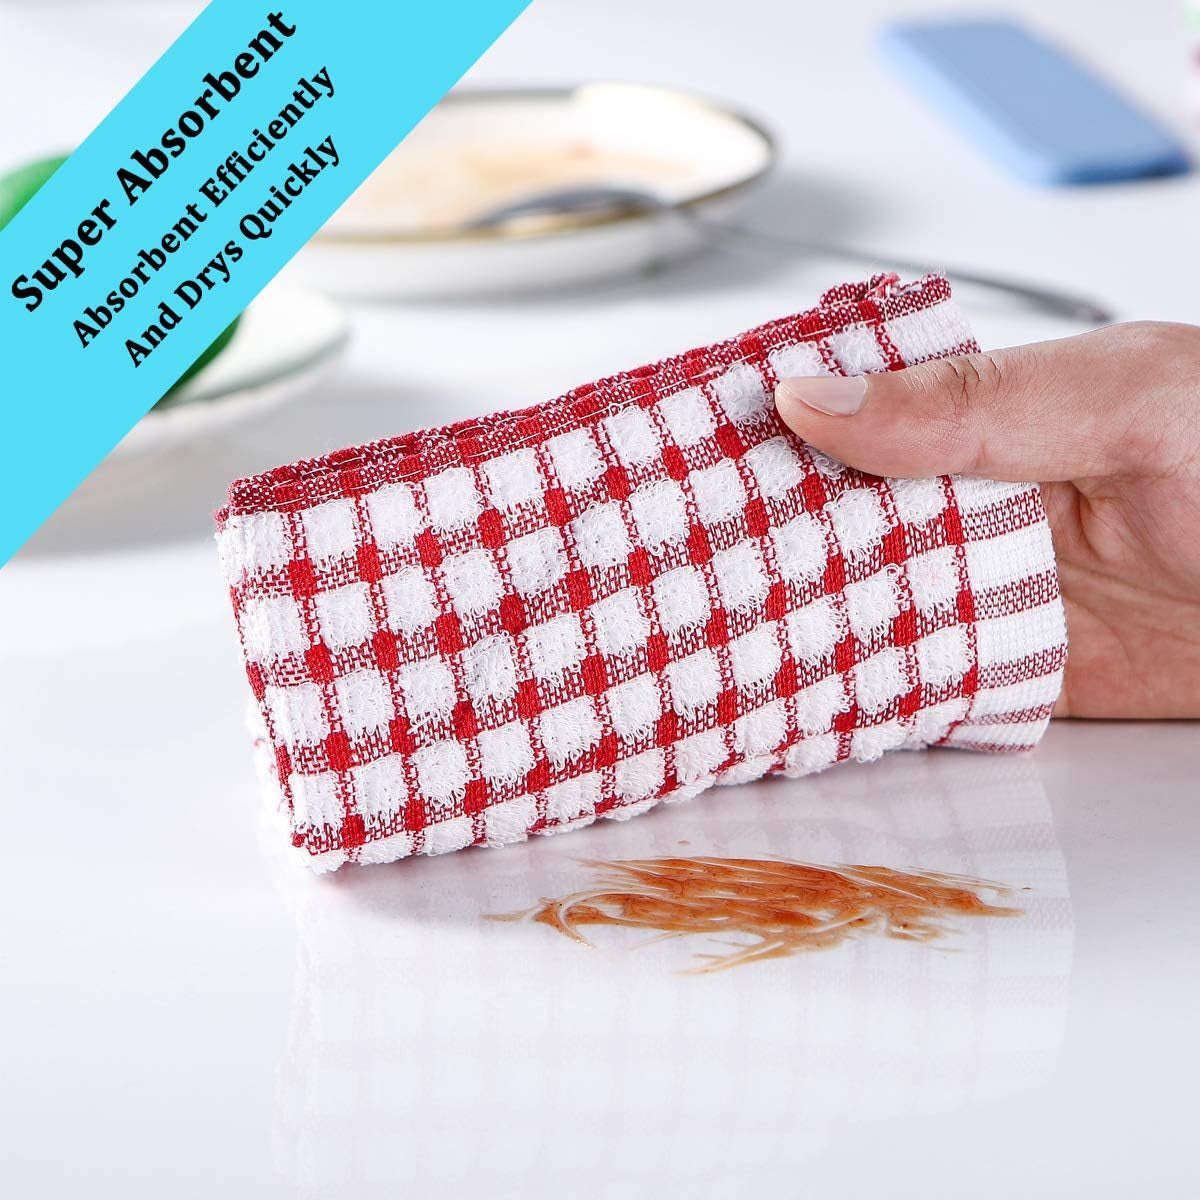 Kitchen Towels and Dishcloths Set, 16 X 25 12 12, Set of Bulk Cotton Dish for Washing Dishes Rags Everyday Cooking Baking